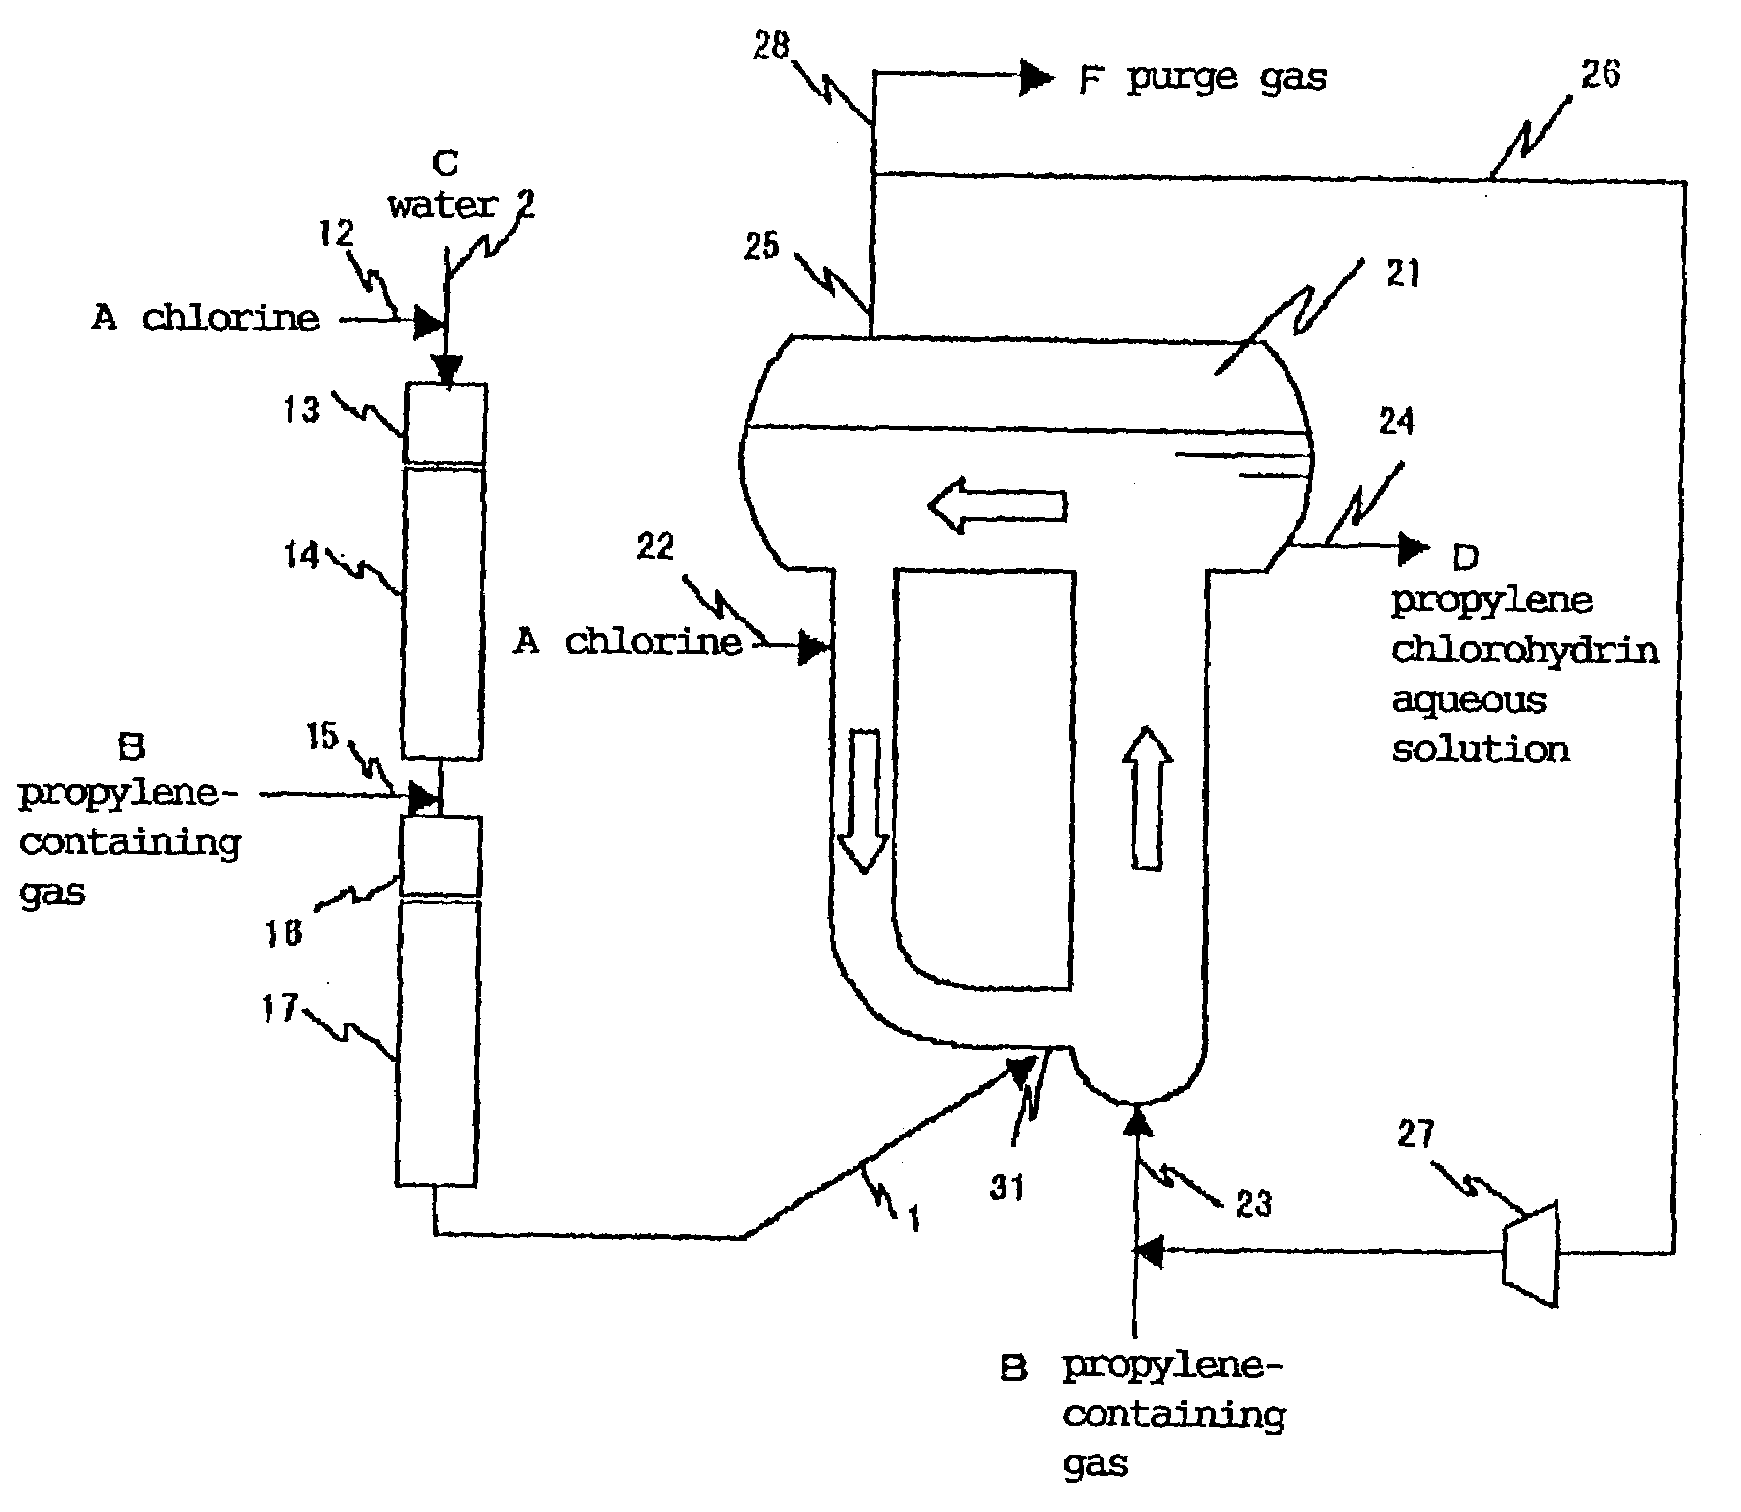 Process for producing propylene chlorohydrin